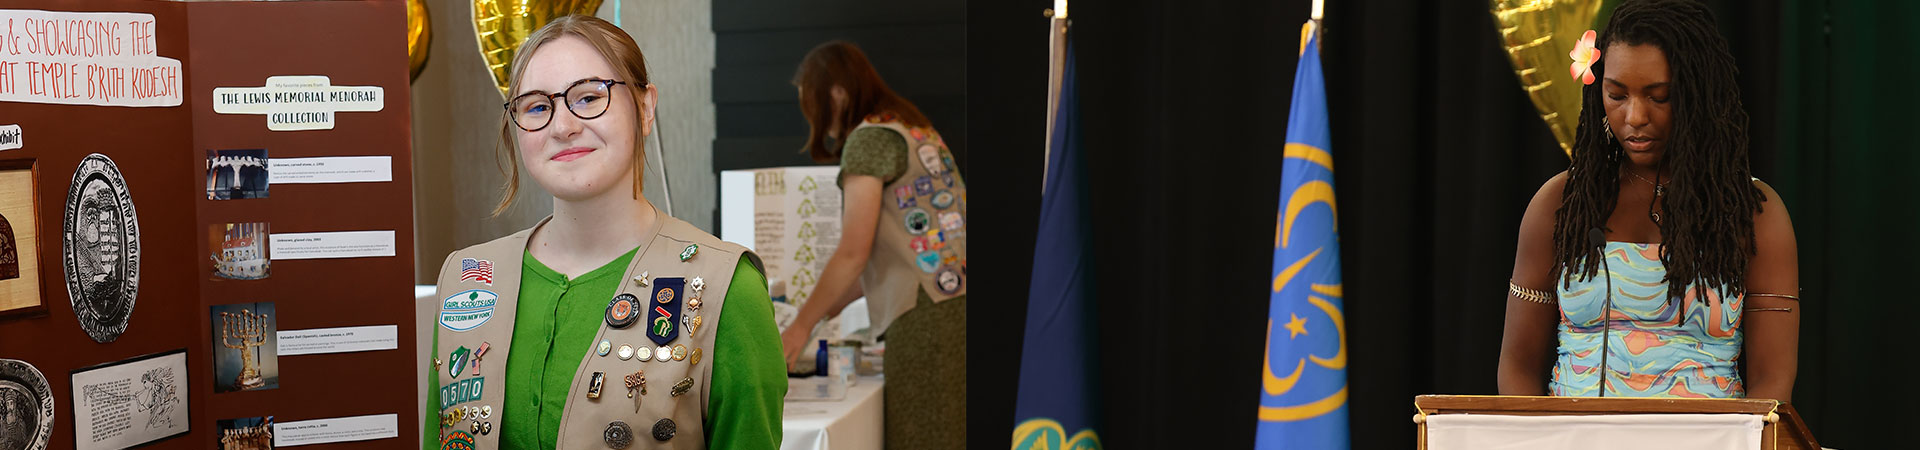  On the left, a photo of a Girl Scout with a light skin tone and tied back blonde hair wearing her tan vest with pins and patches next to a project she created. On the right, a girl with a dark skin tone and long braided black hair wearing a blue floral dress and speaking at a podium 